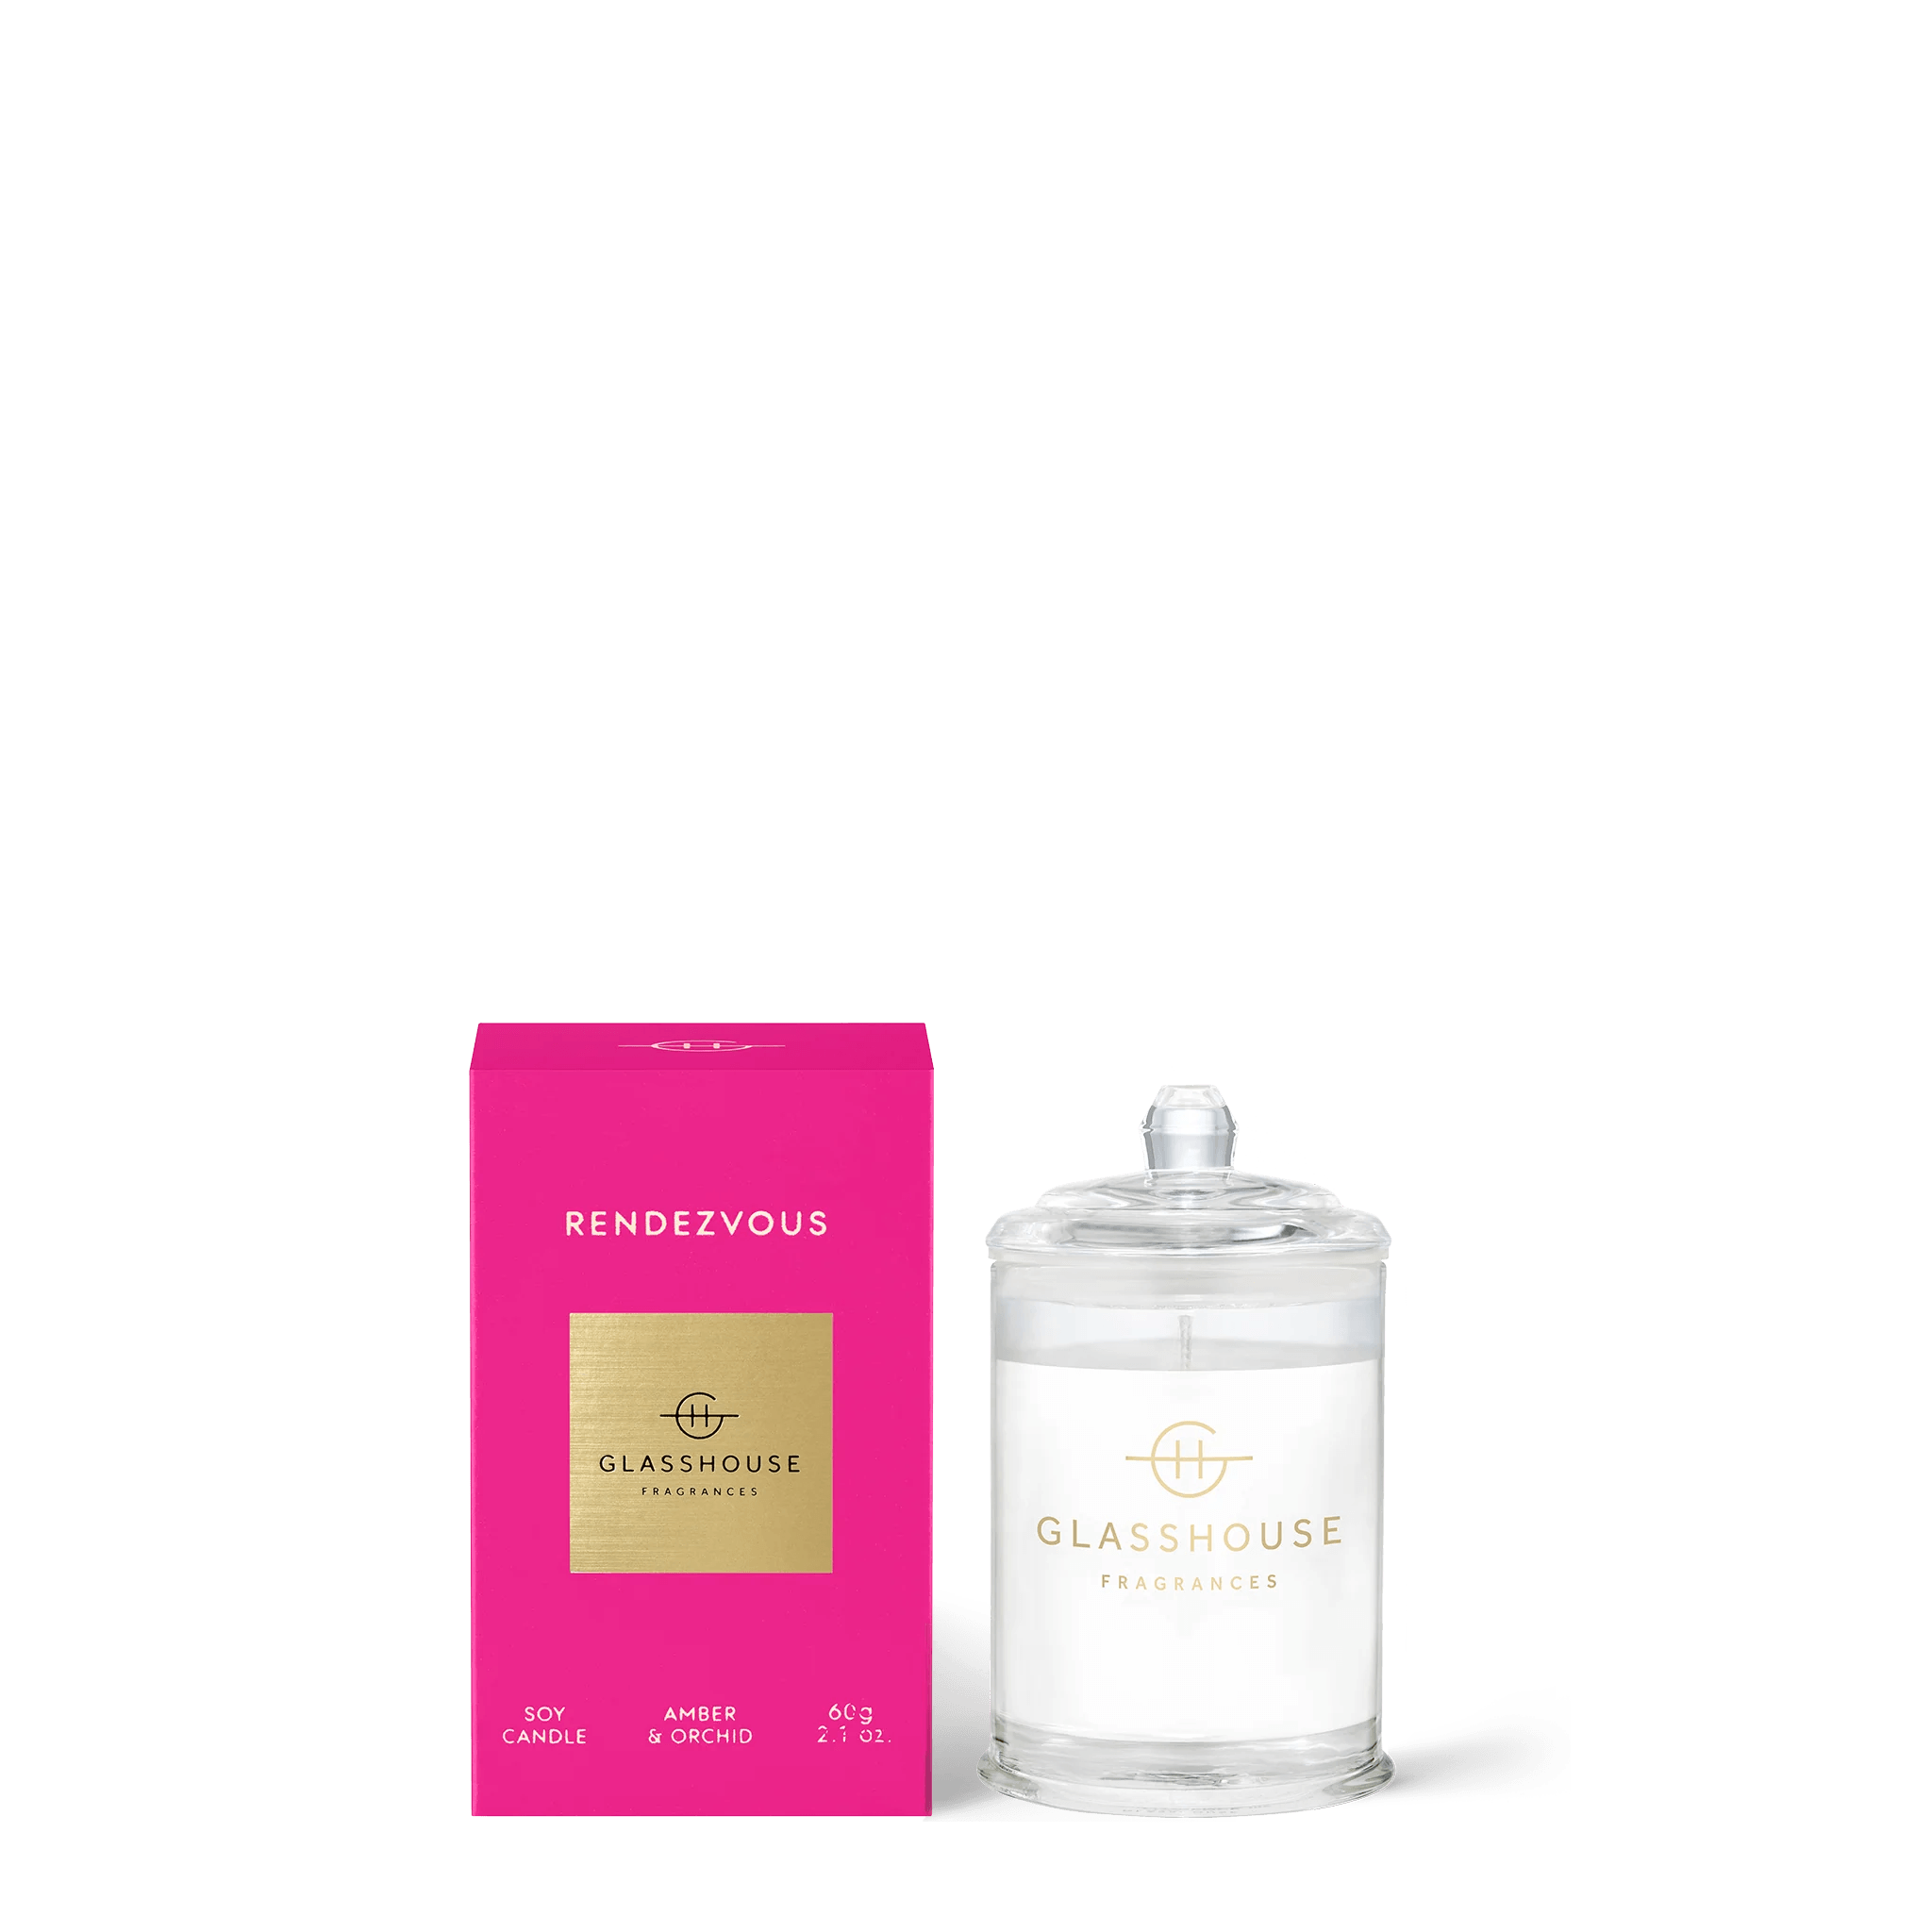 Glasshouse Rendezvous Candle 60g - Exquisite Laser Clinic